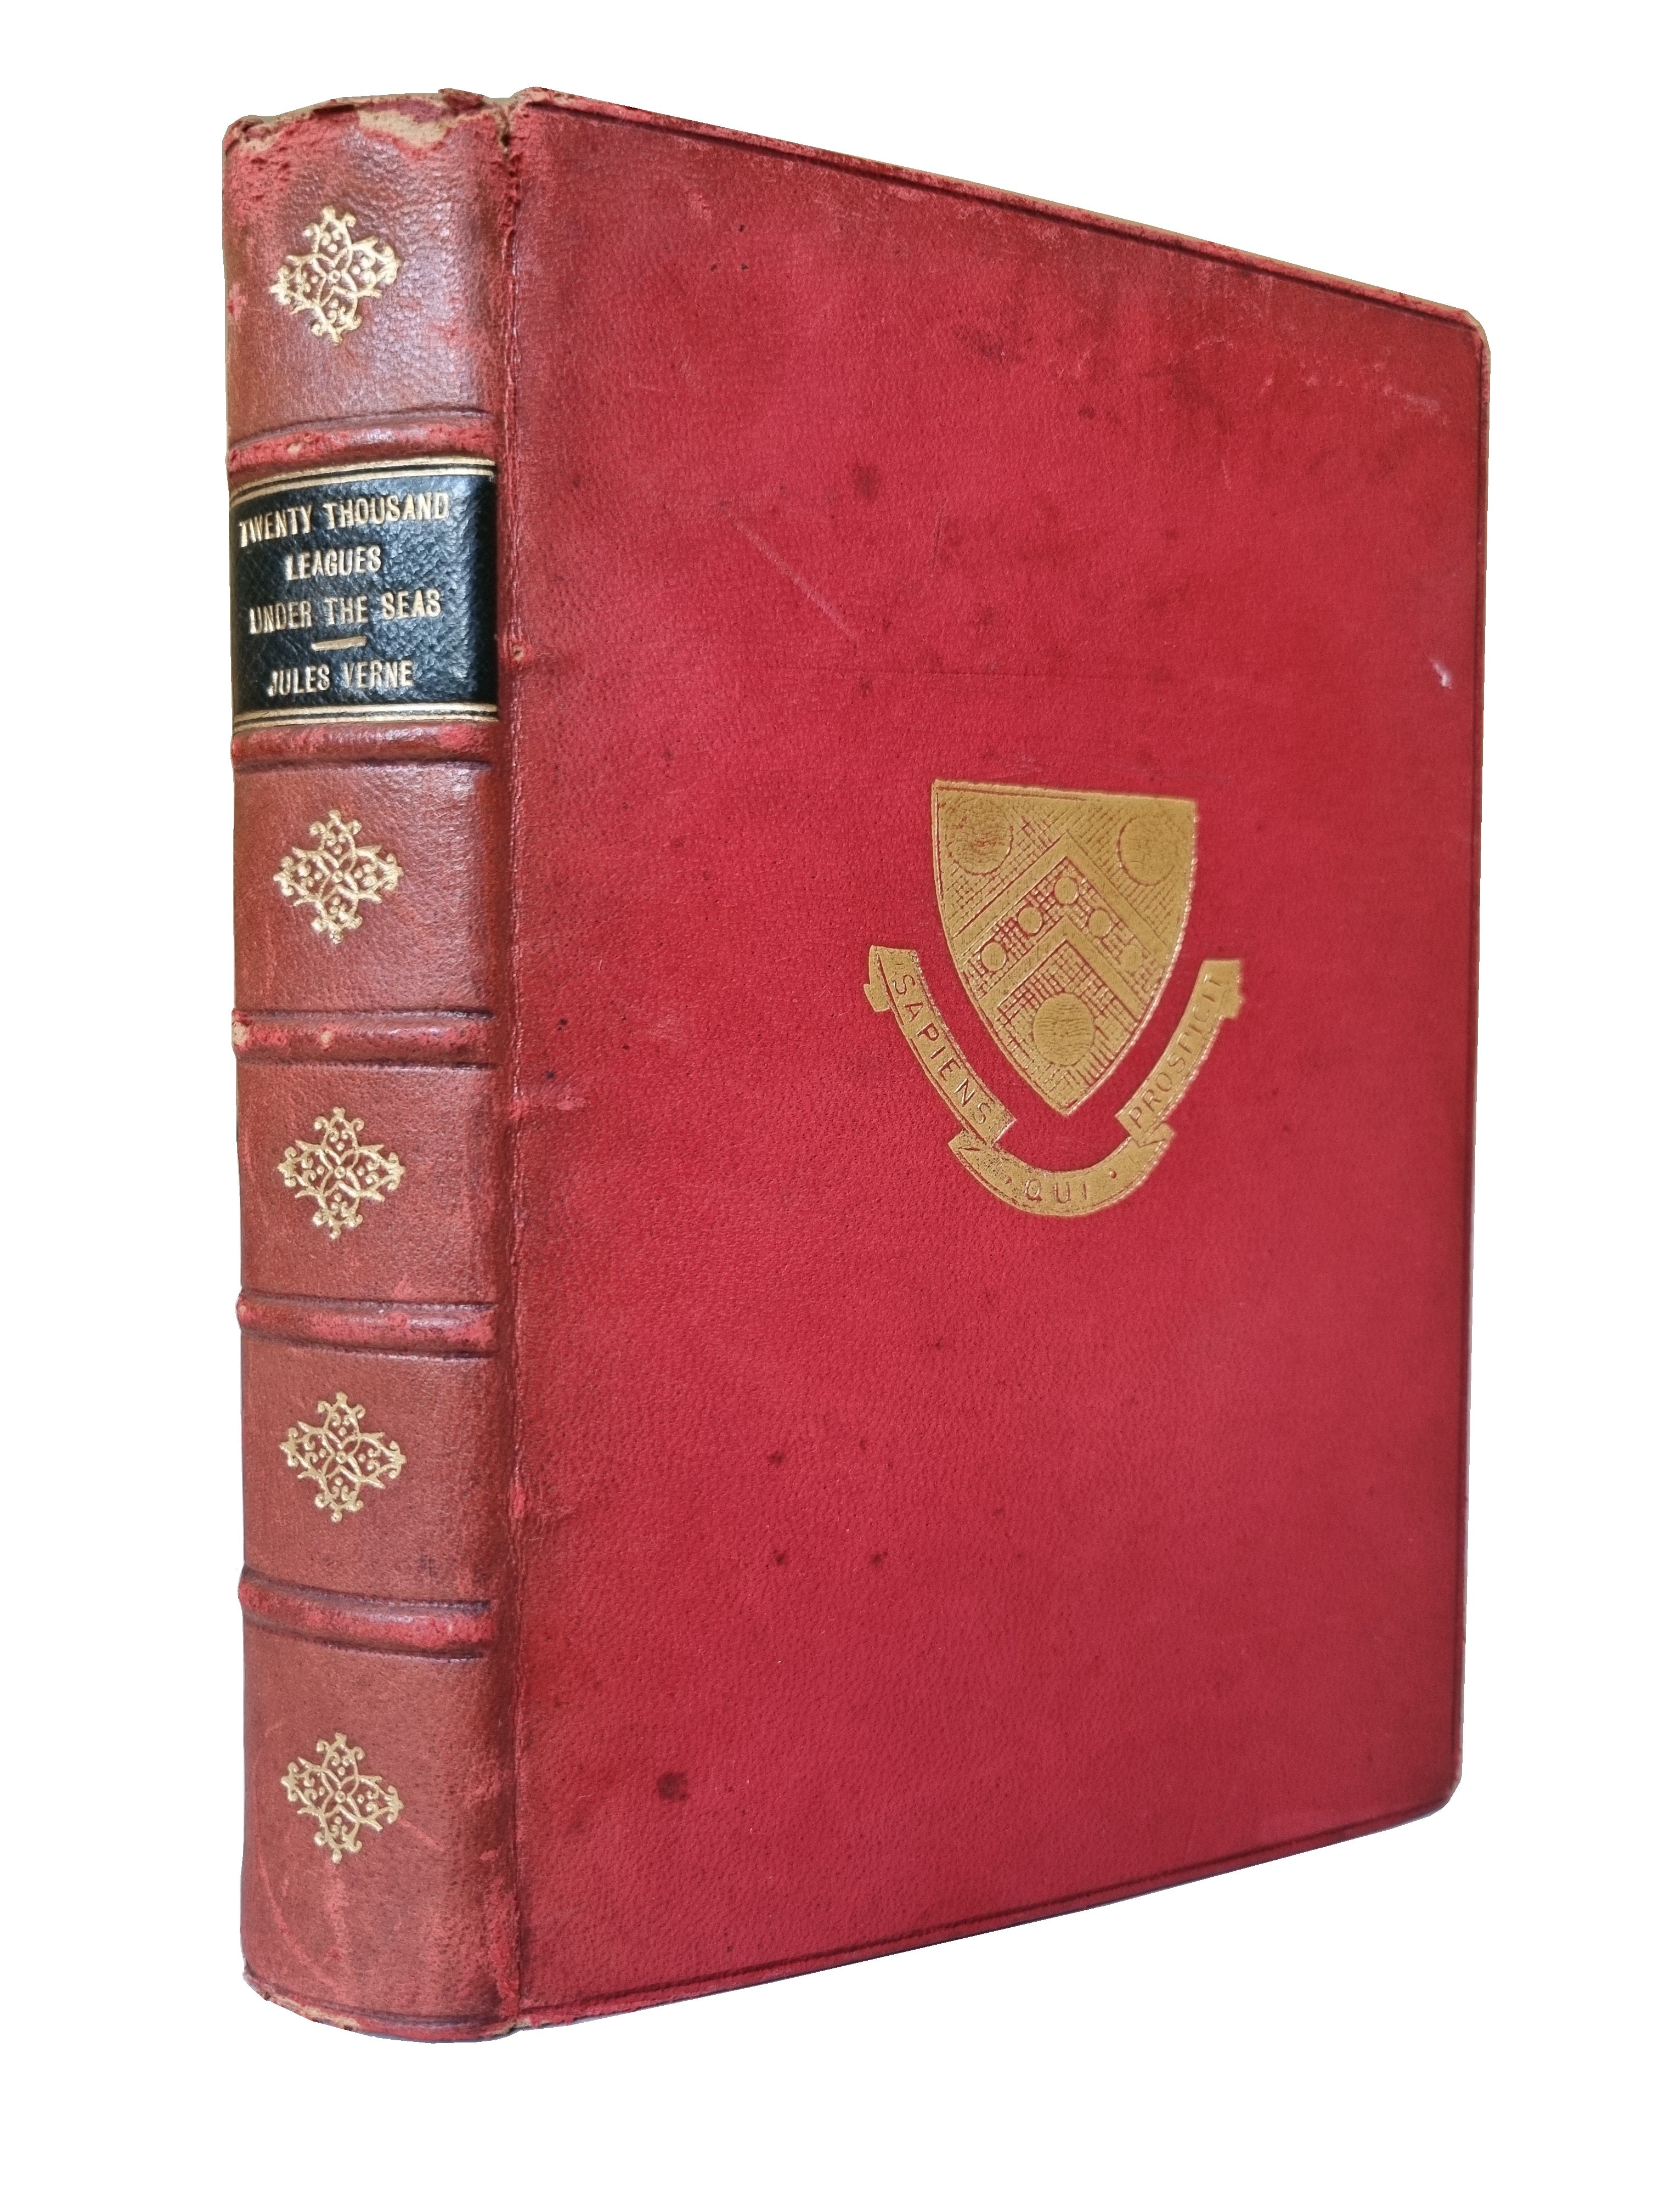 TWENTY THOUSAND LEAGUES UNDER THE SEAS BY JULES VERNE CIRCA 1900 LEATHER-BOUND